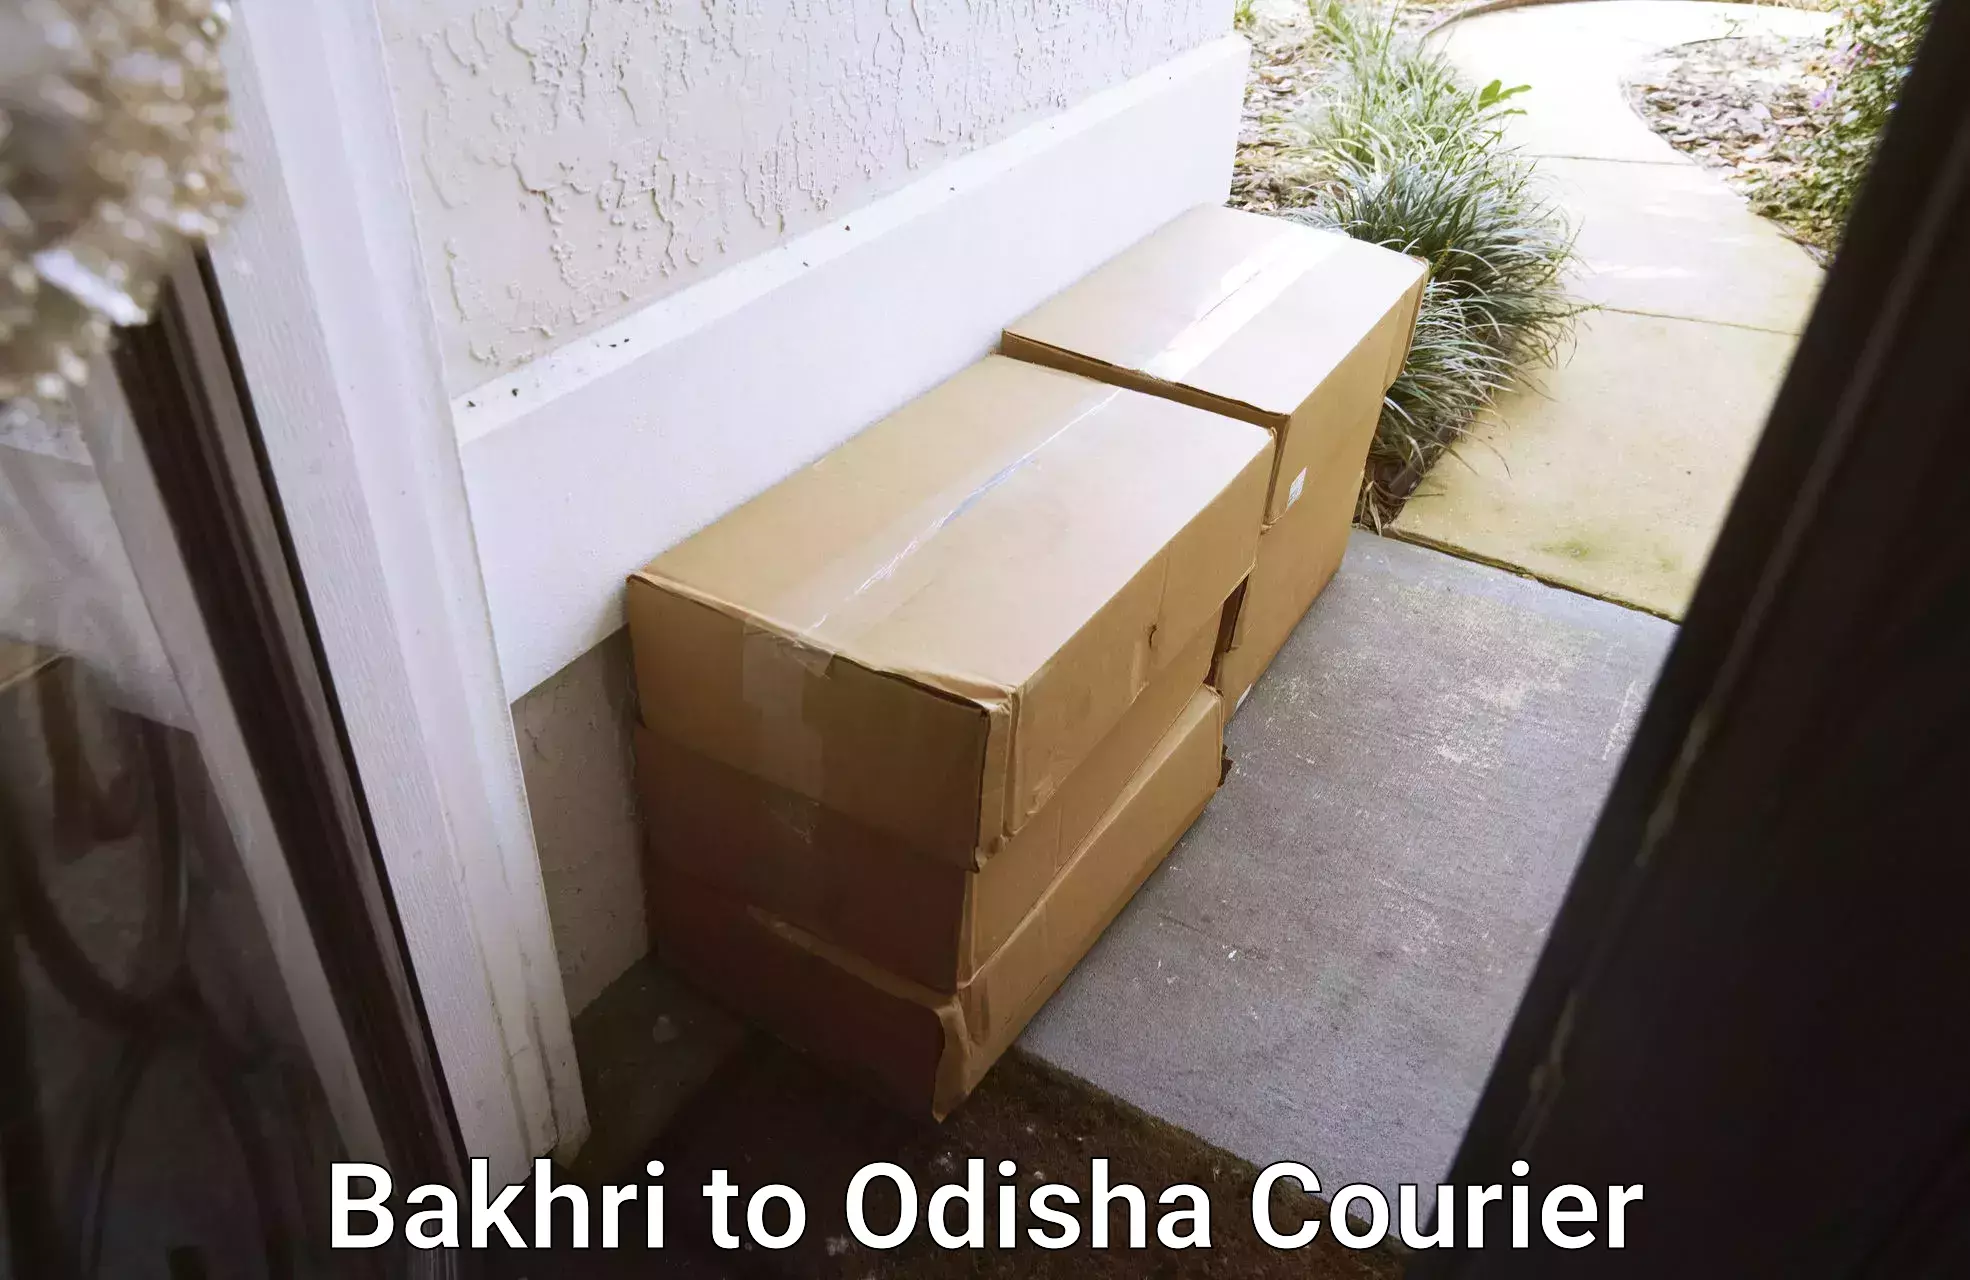 Furniture delivery service Bakhri to Bhawanipatna